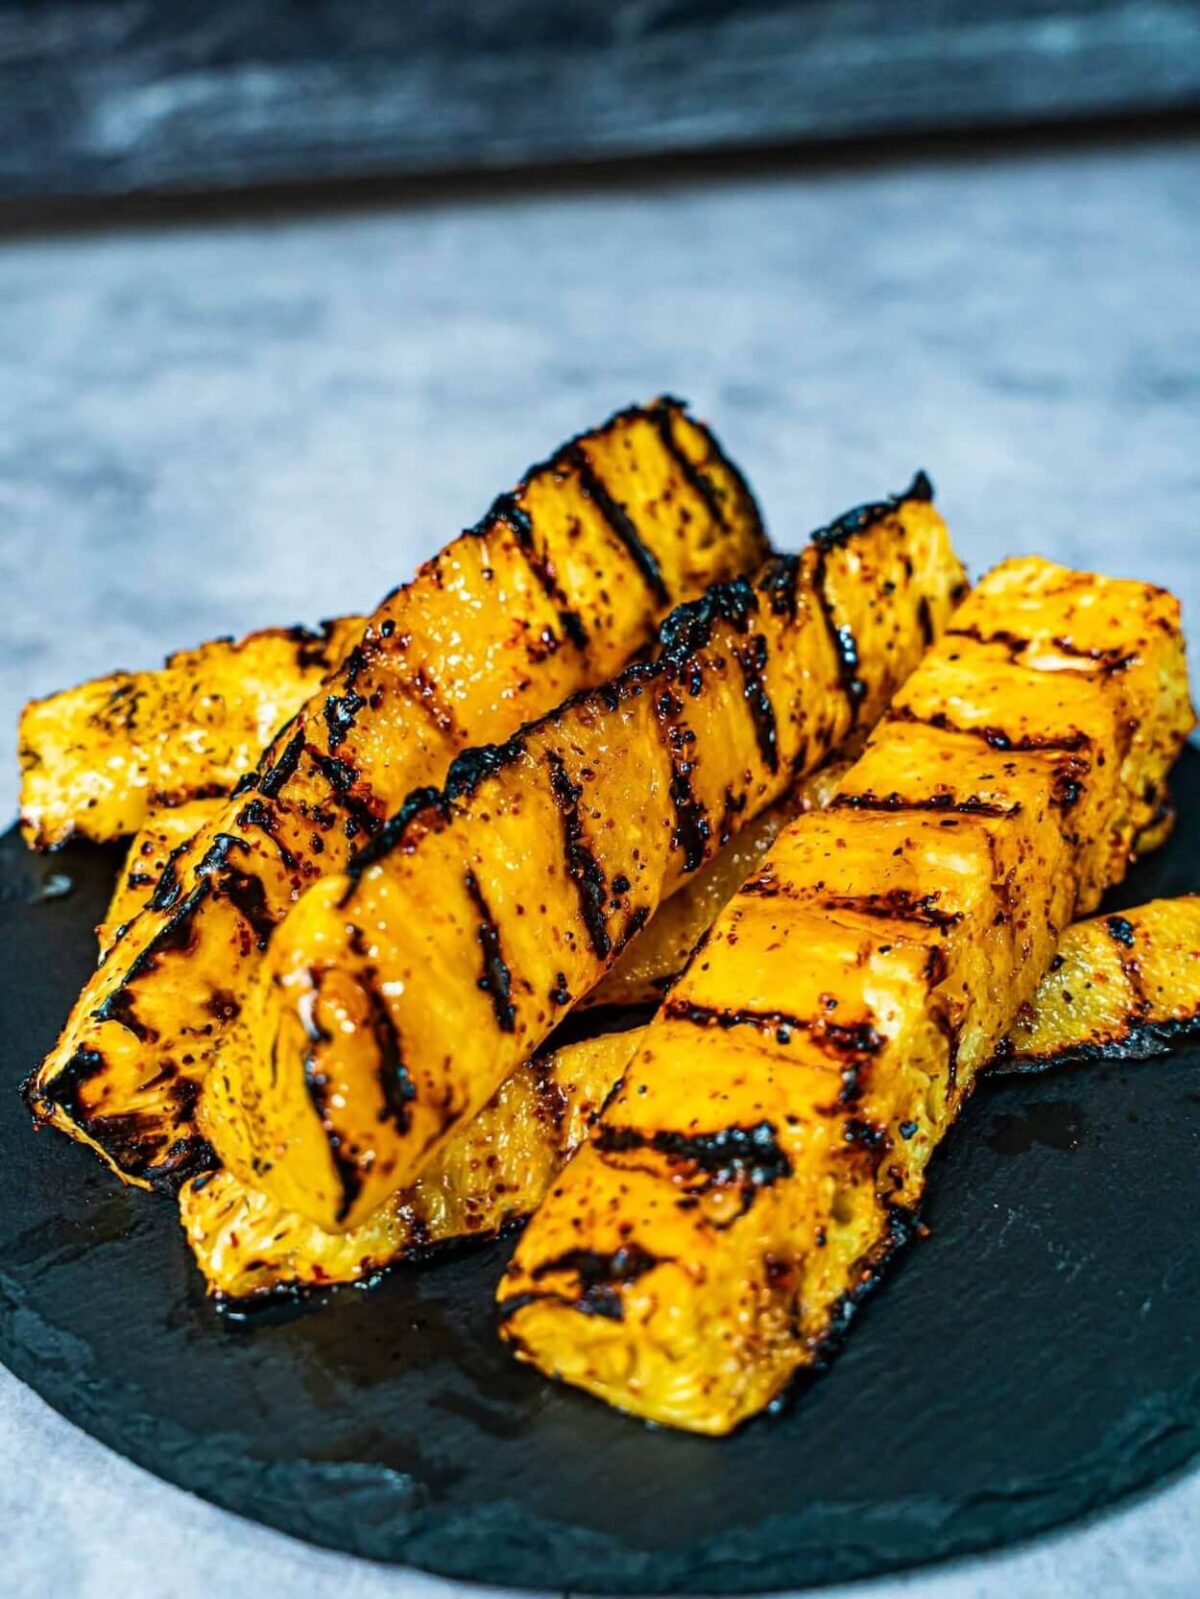 slices of grilled pineapple on black tray.